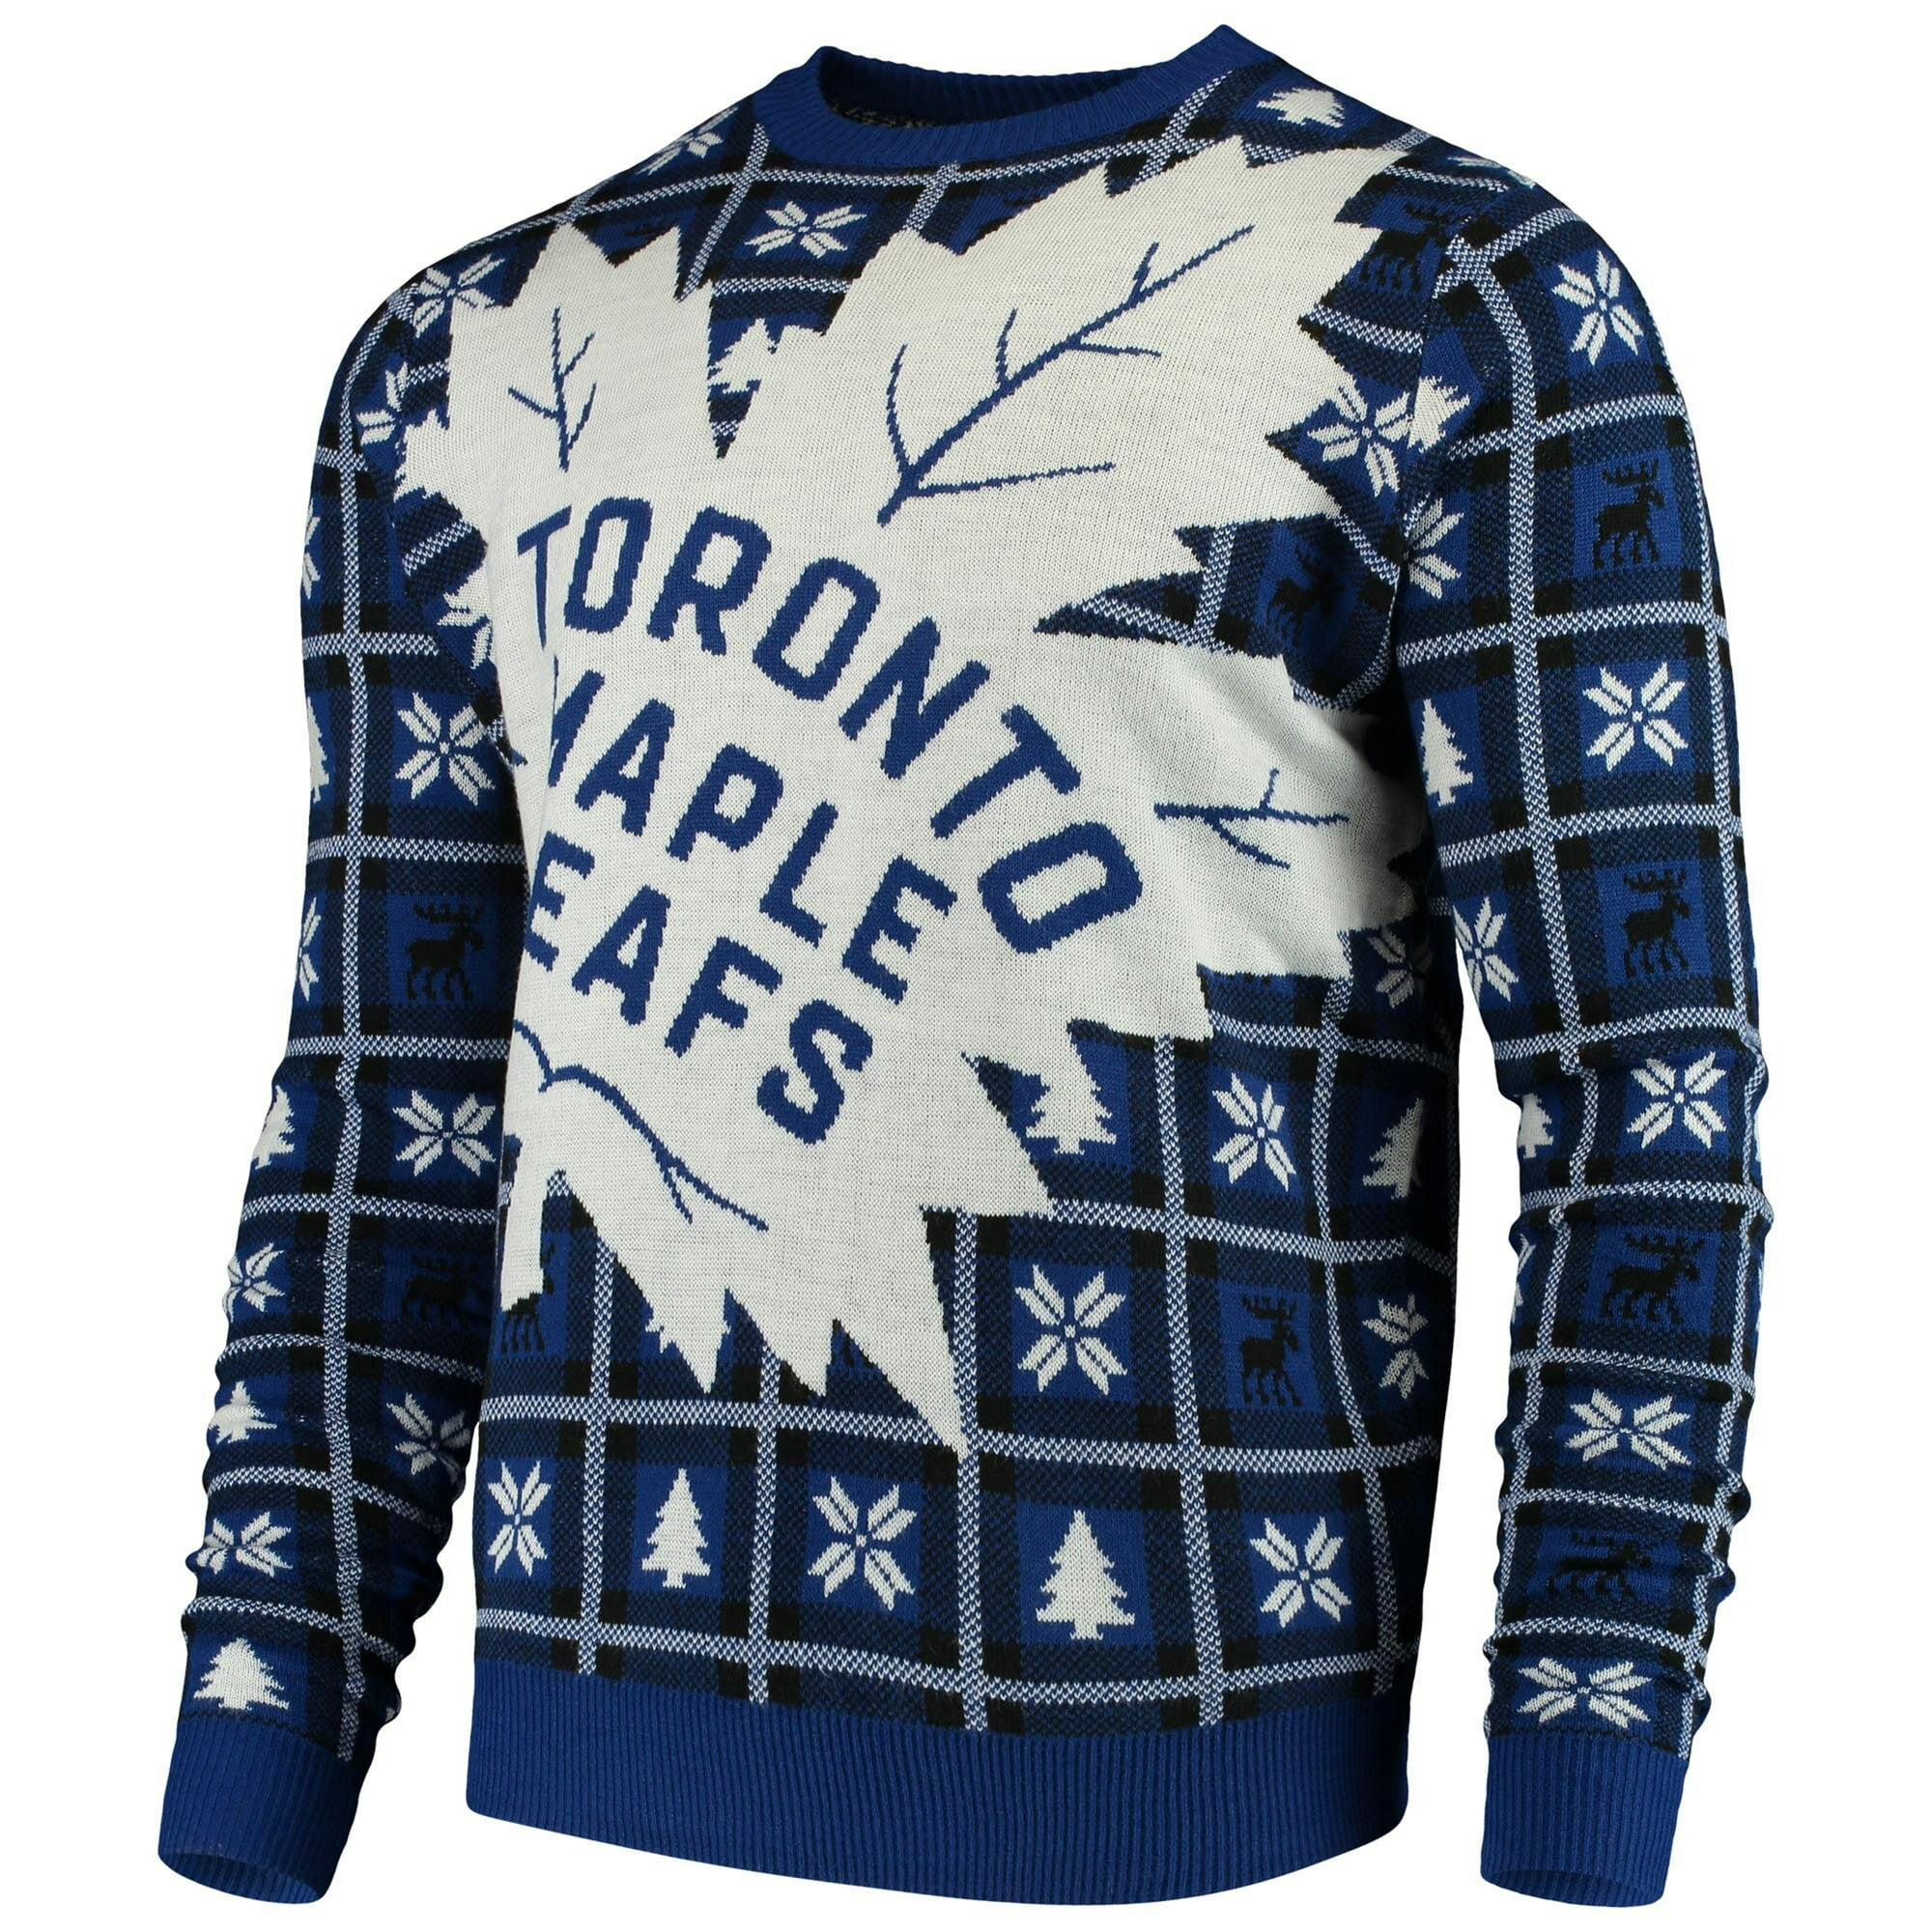 NHL Toronto Maple Leafs Grinch & Scooby-Doo Ideas Logo Ugly Christmas  Sweater For Fans - Banantees